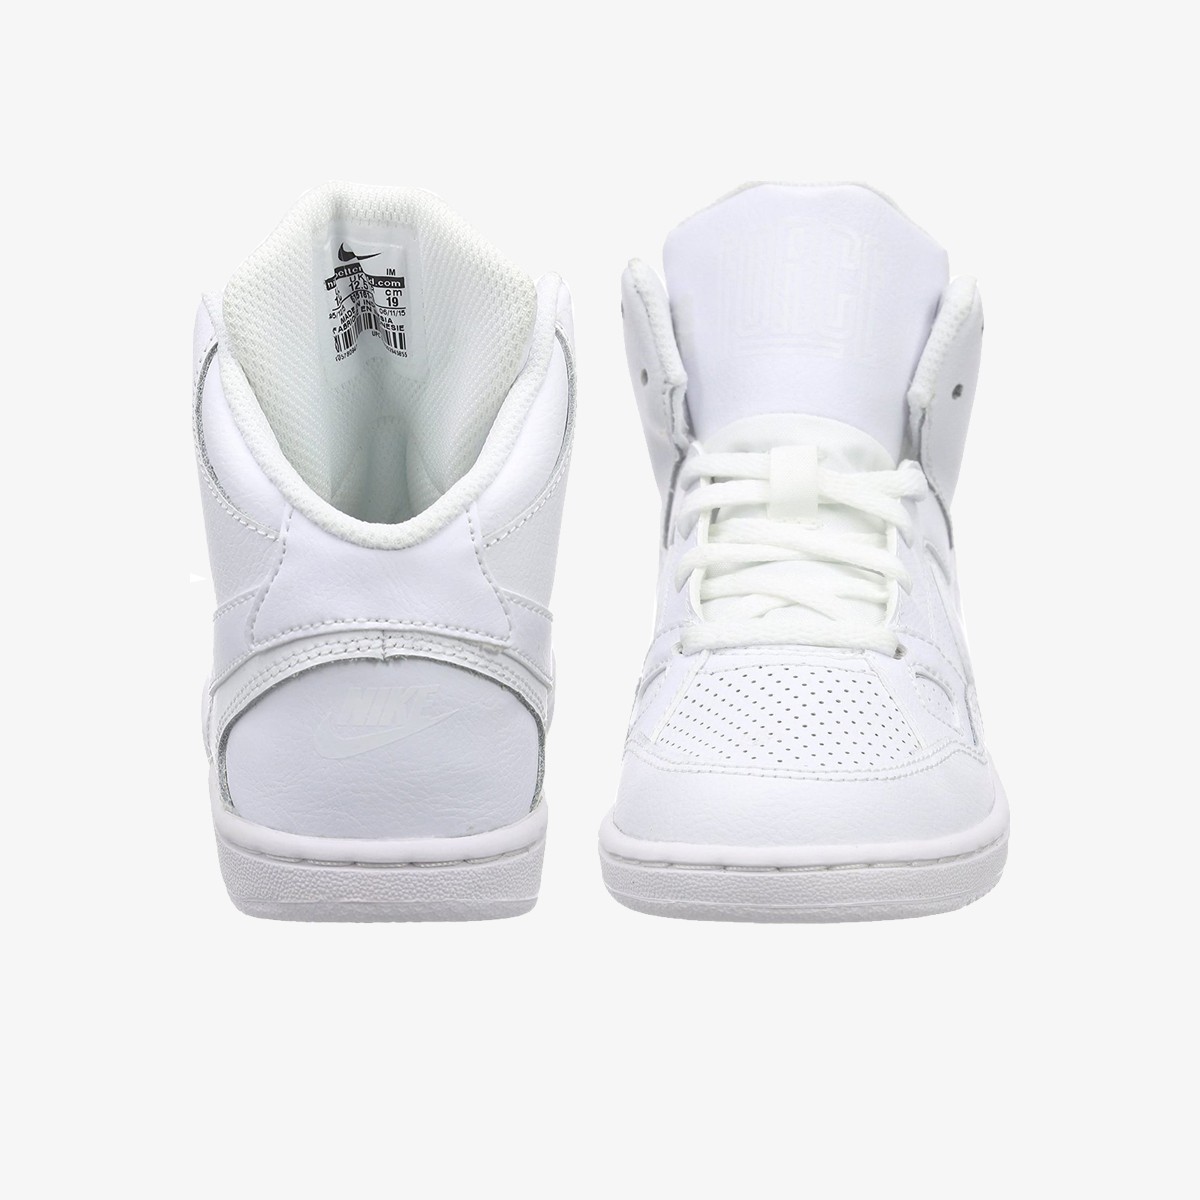 Nike SON OF FORCE MID (PS) 